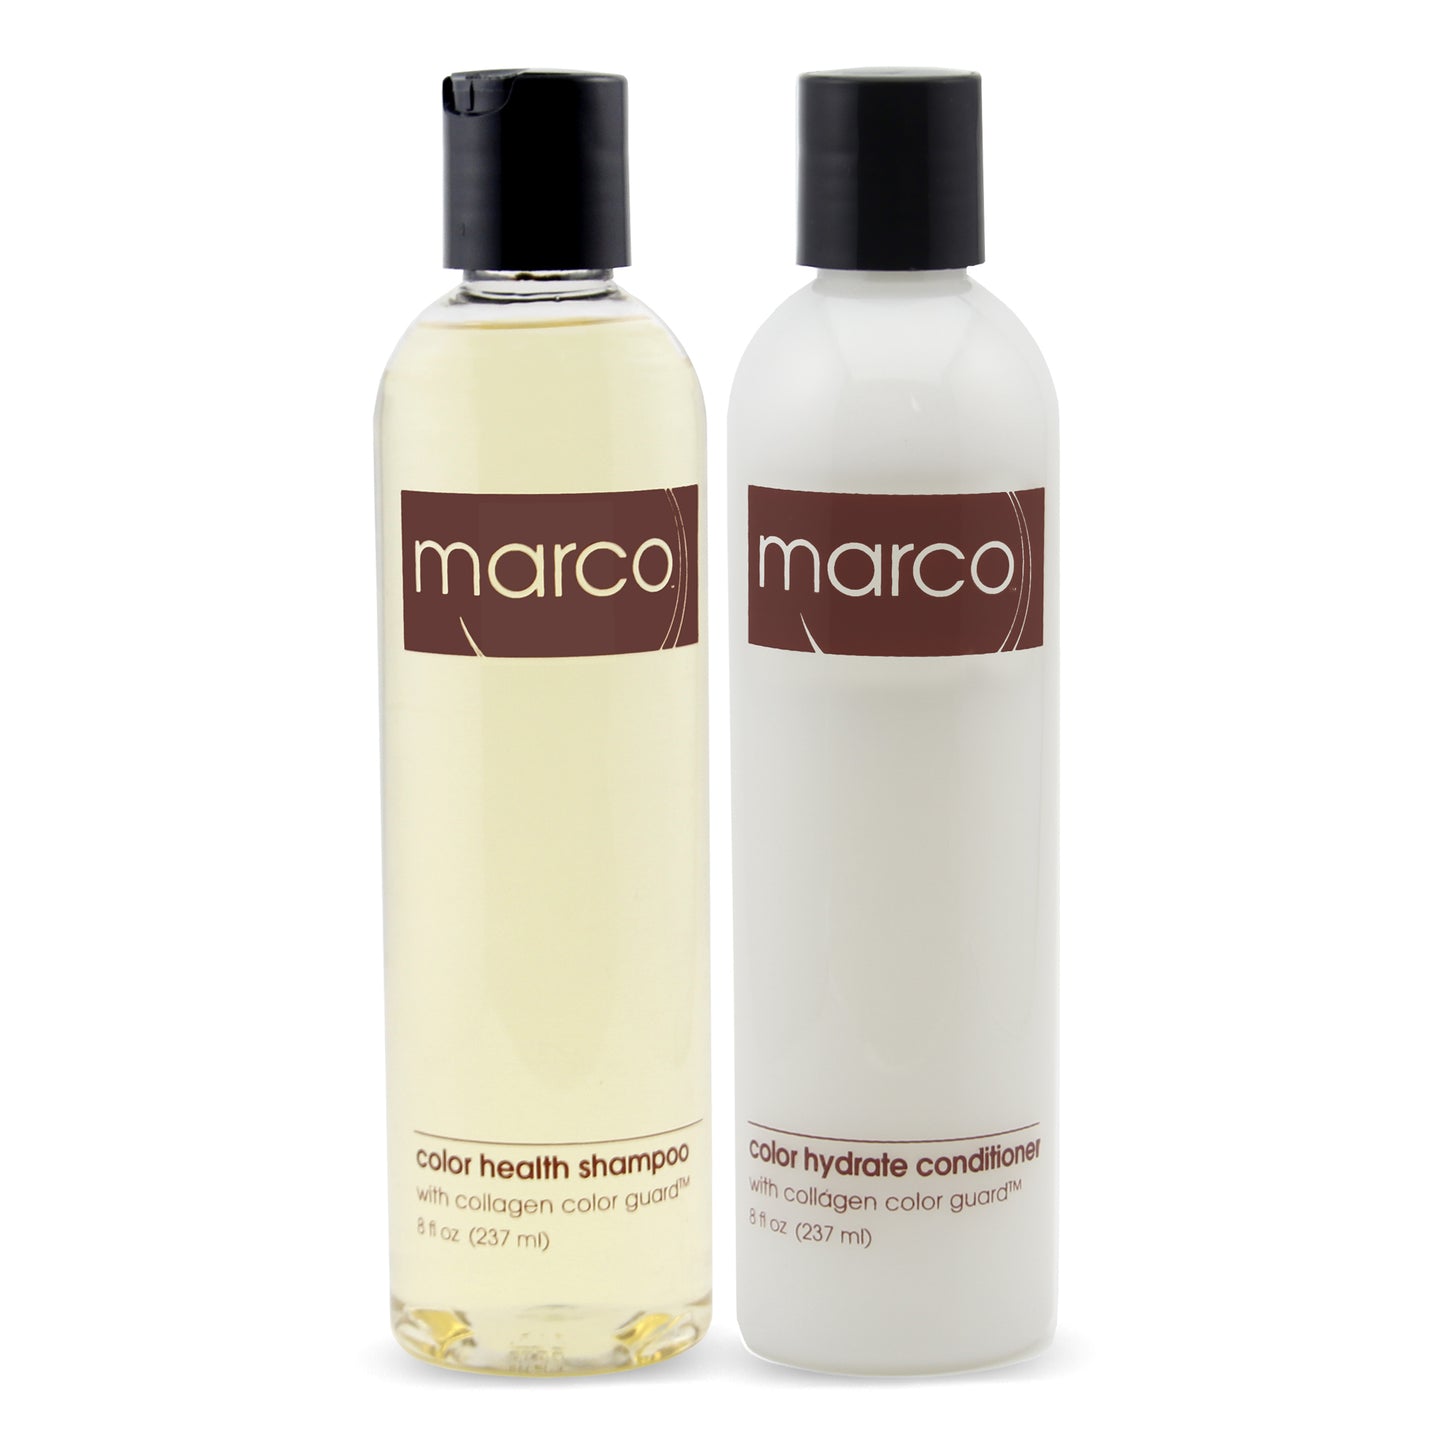 Two bottles, Marco color health shampoo and hydrate conditioner with collagen color guard